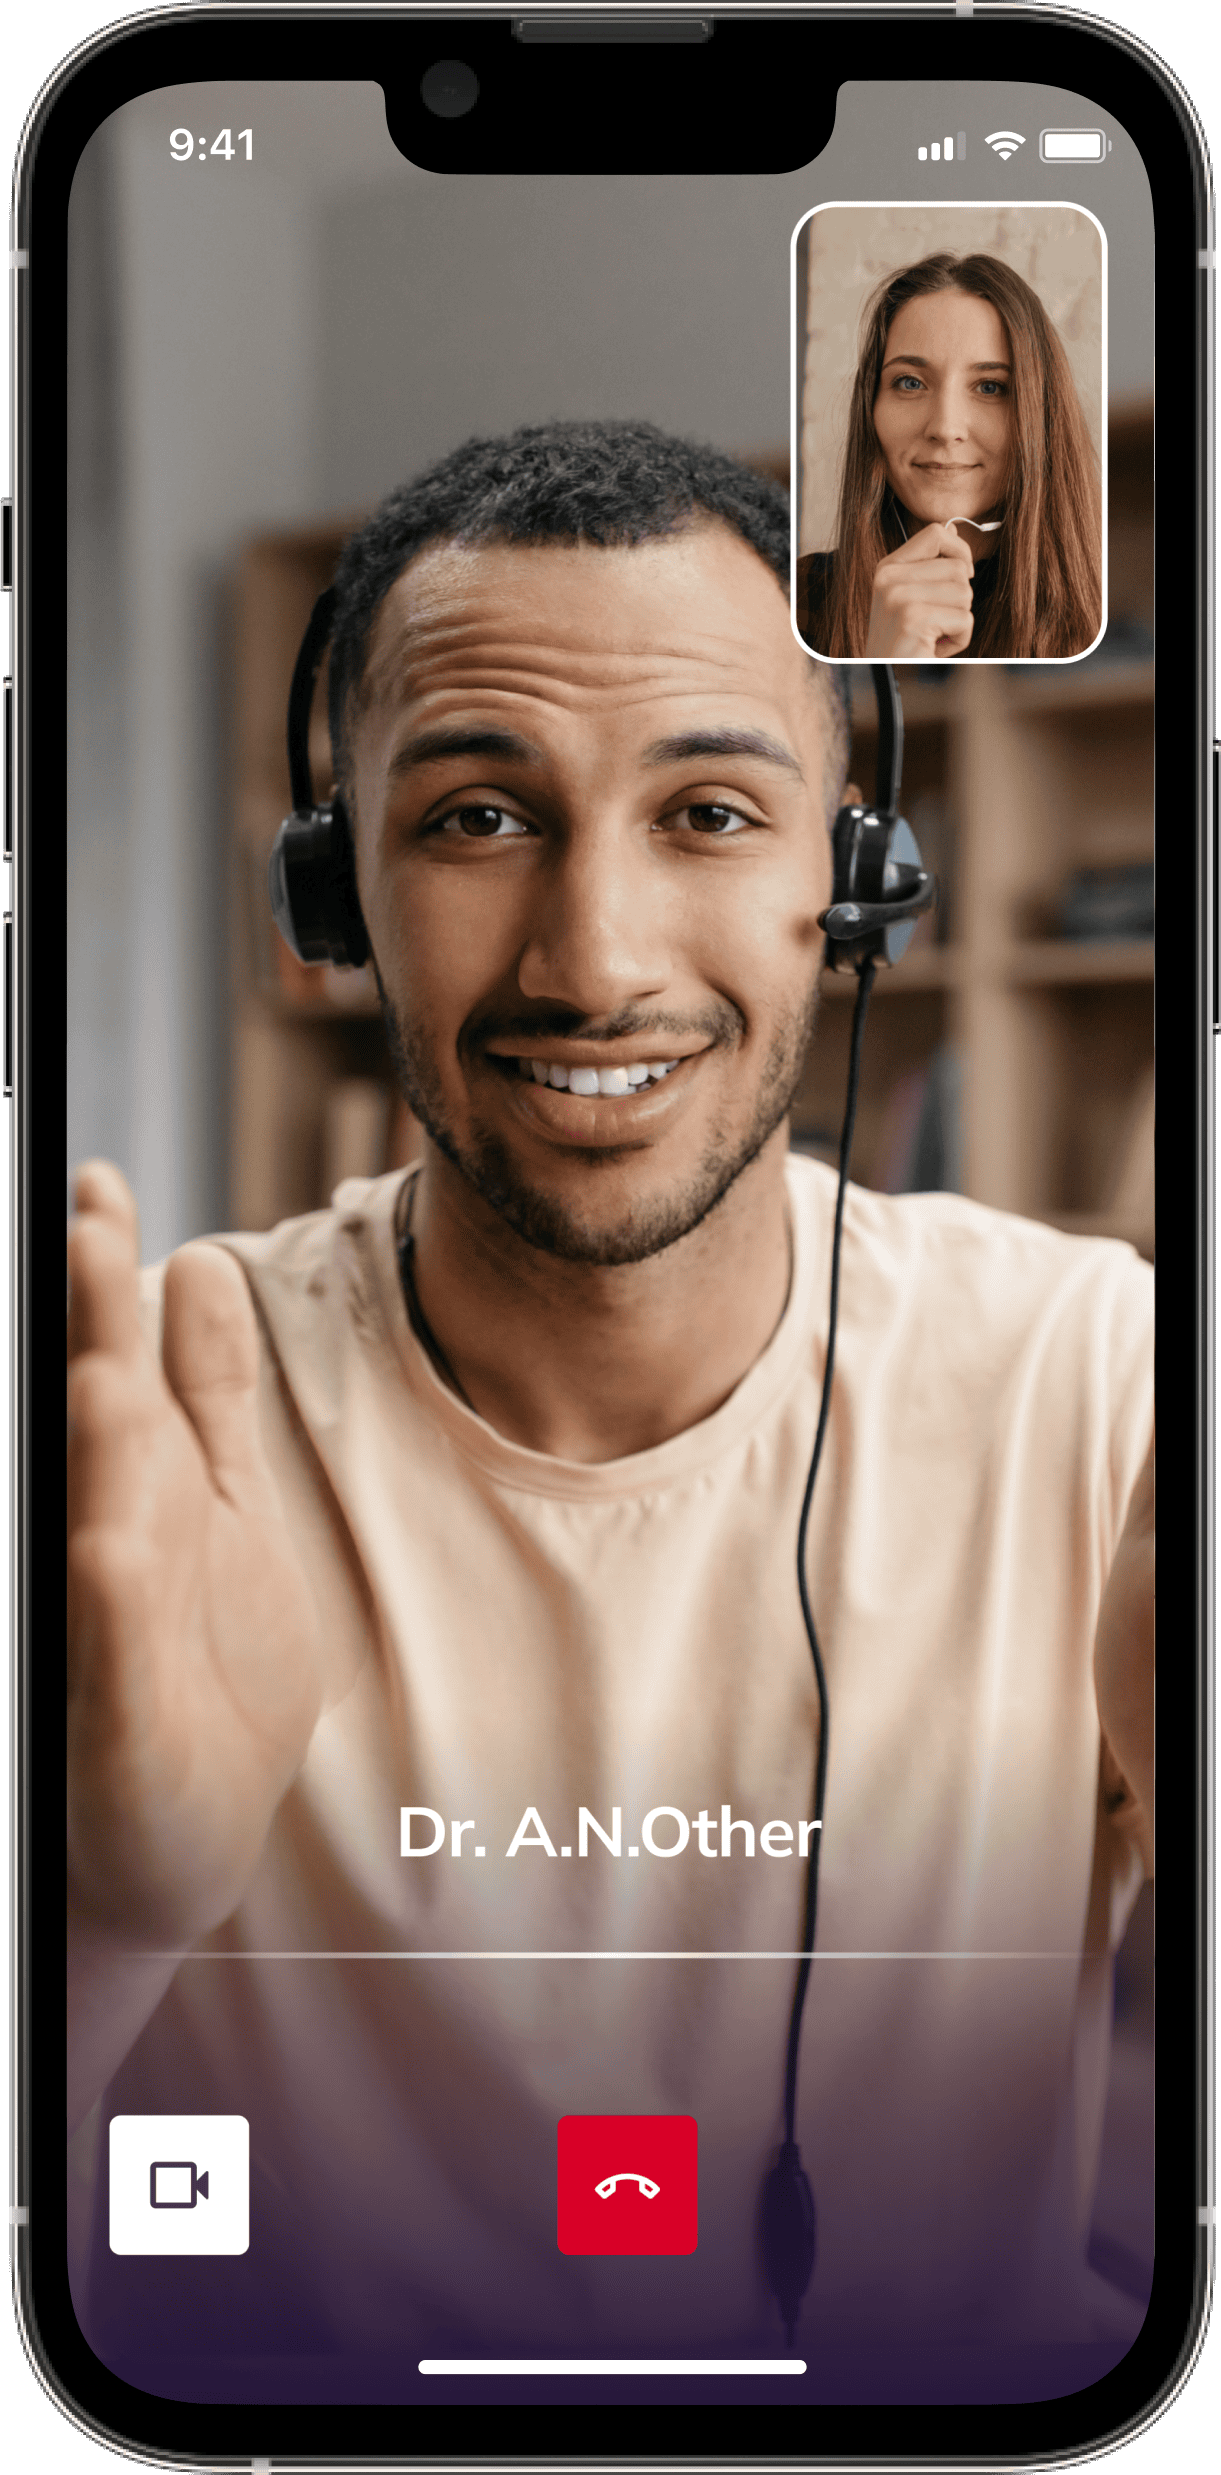 A man with a headset is on a video call with a woman, displayed on a smartphone screen. The man's name, "Dr. A.N.Other," is shown at the bottom of the screen.